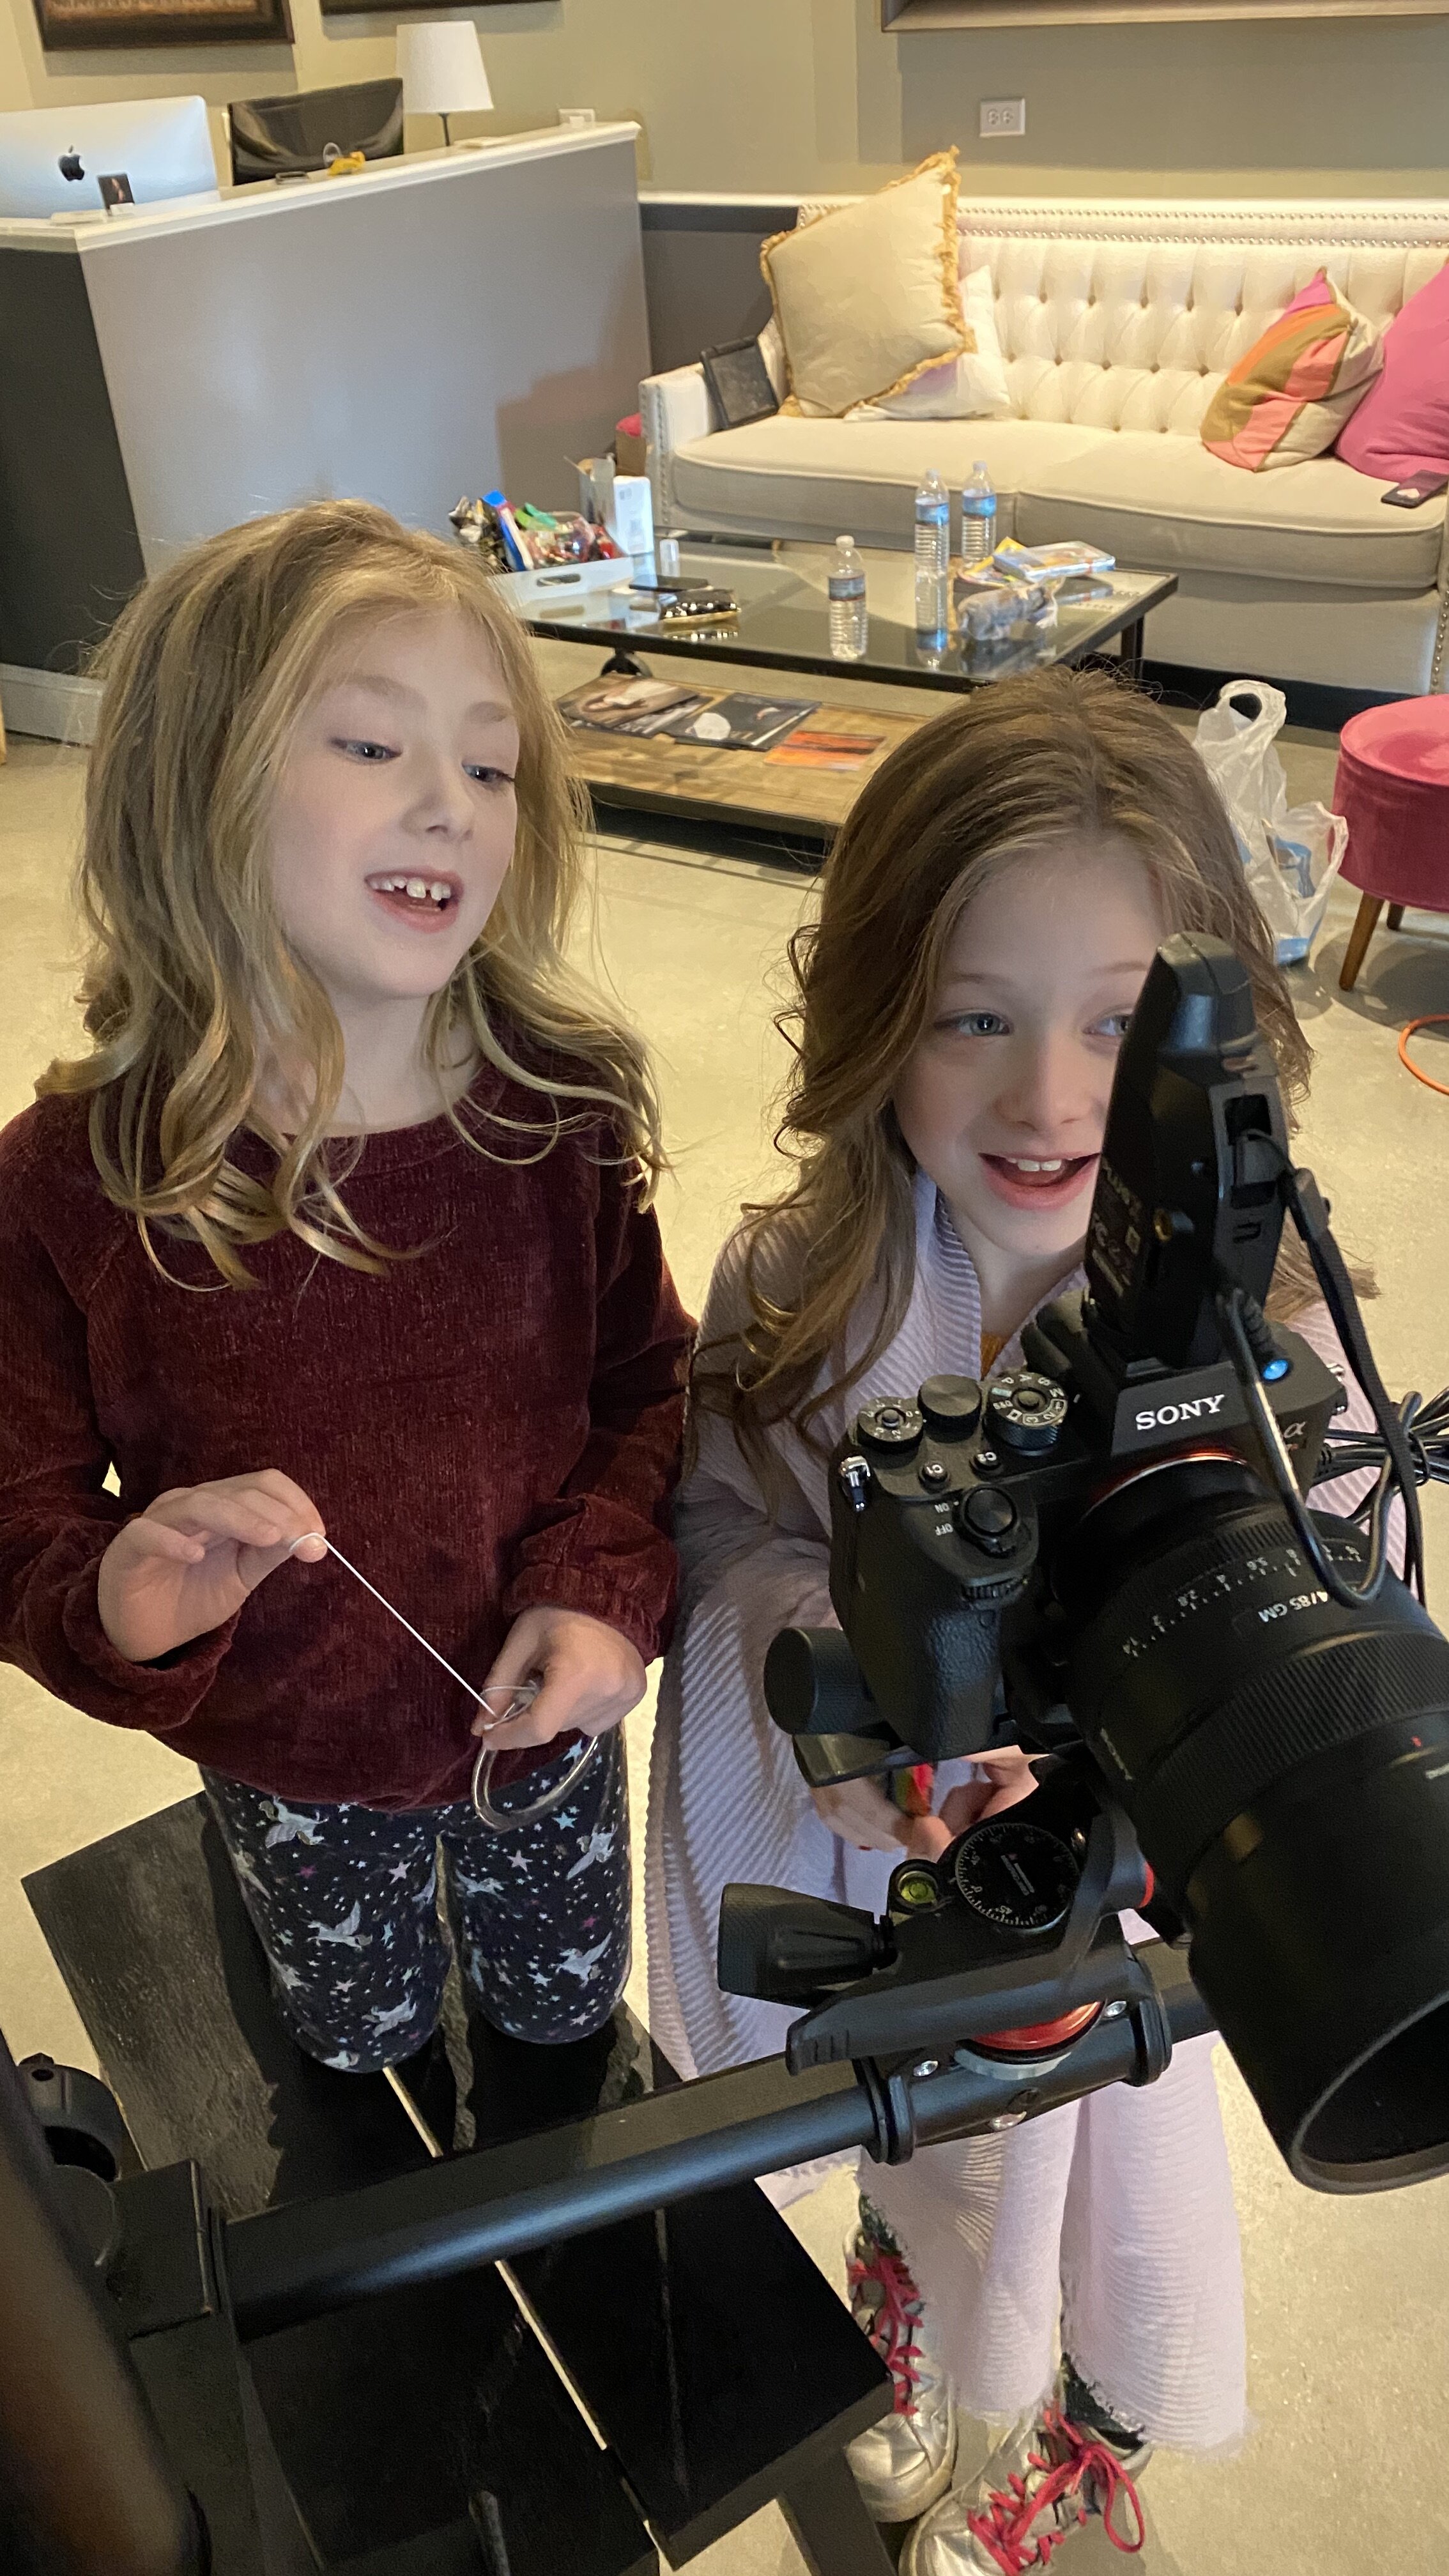 children-looking behind-the-camera-reacting-to-portrtiat-picture-image